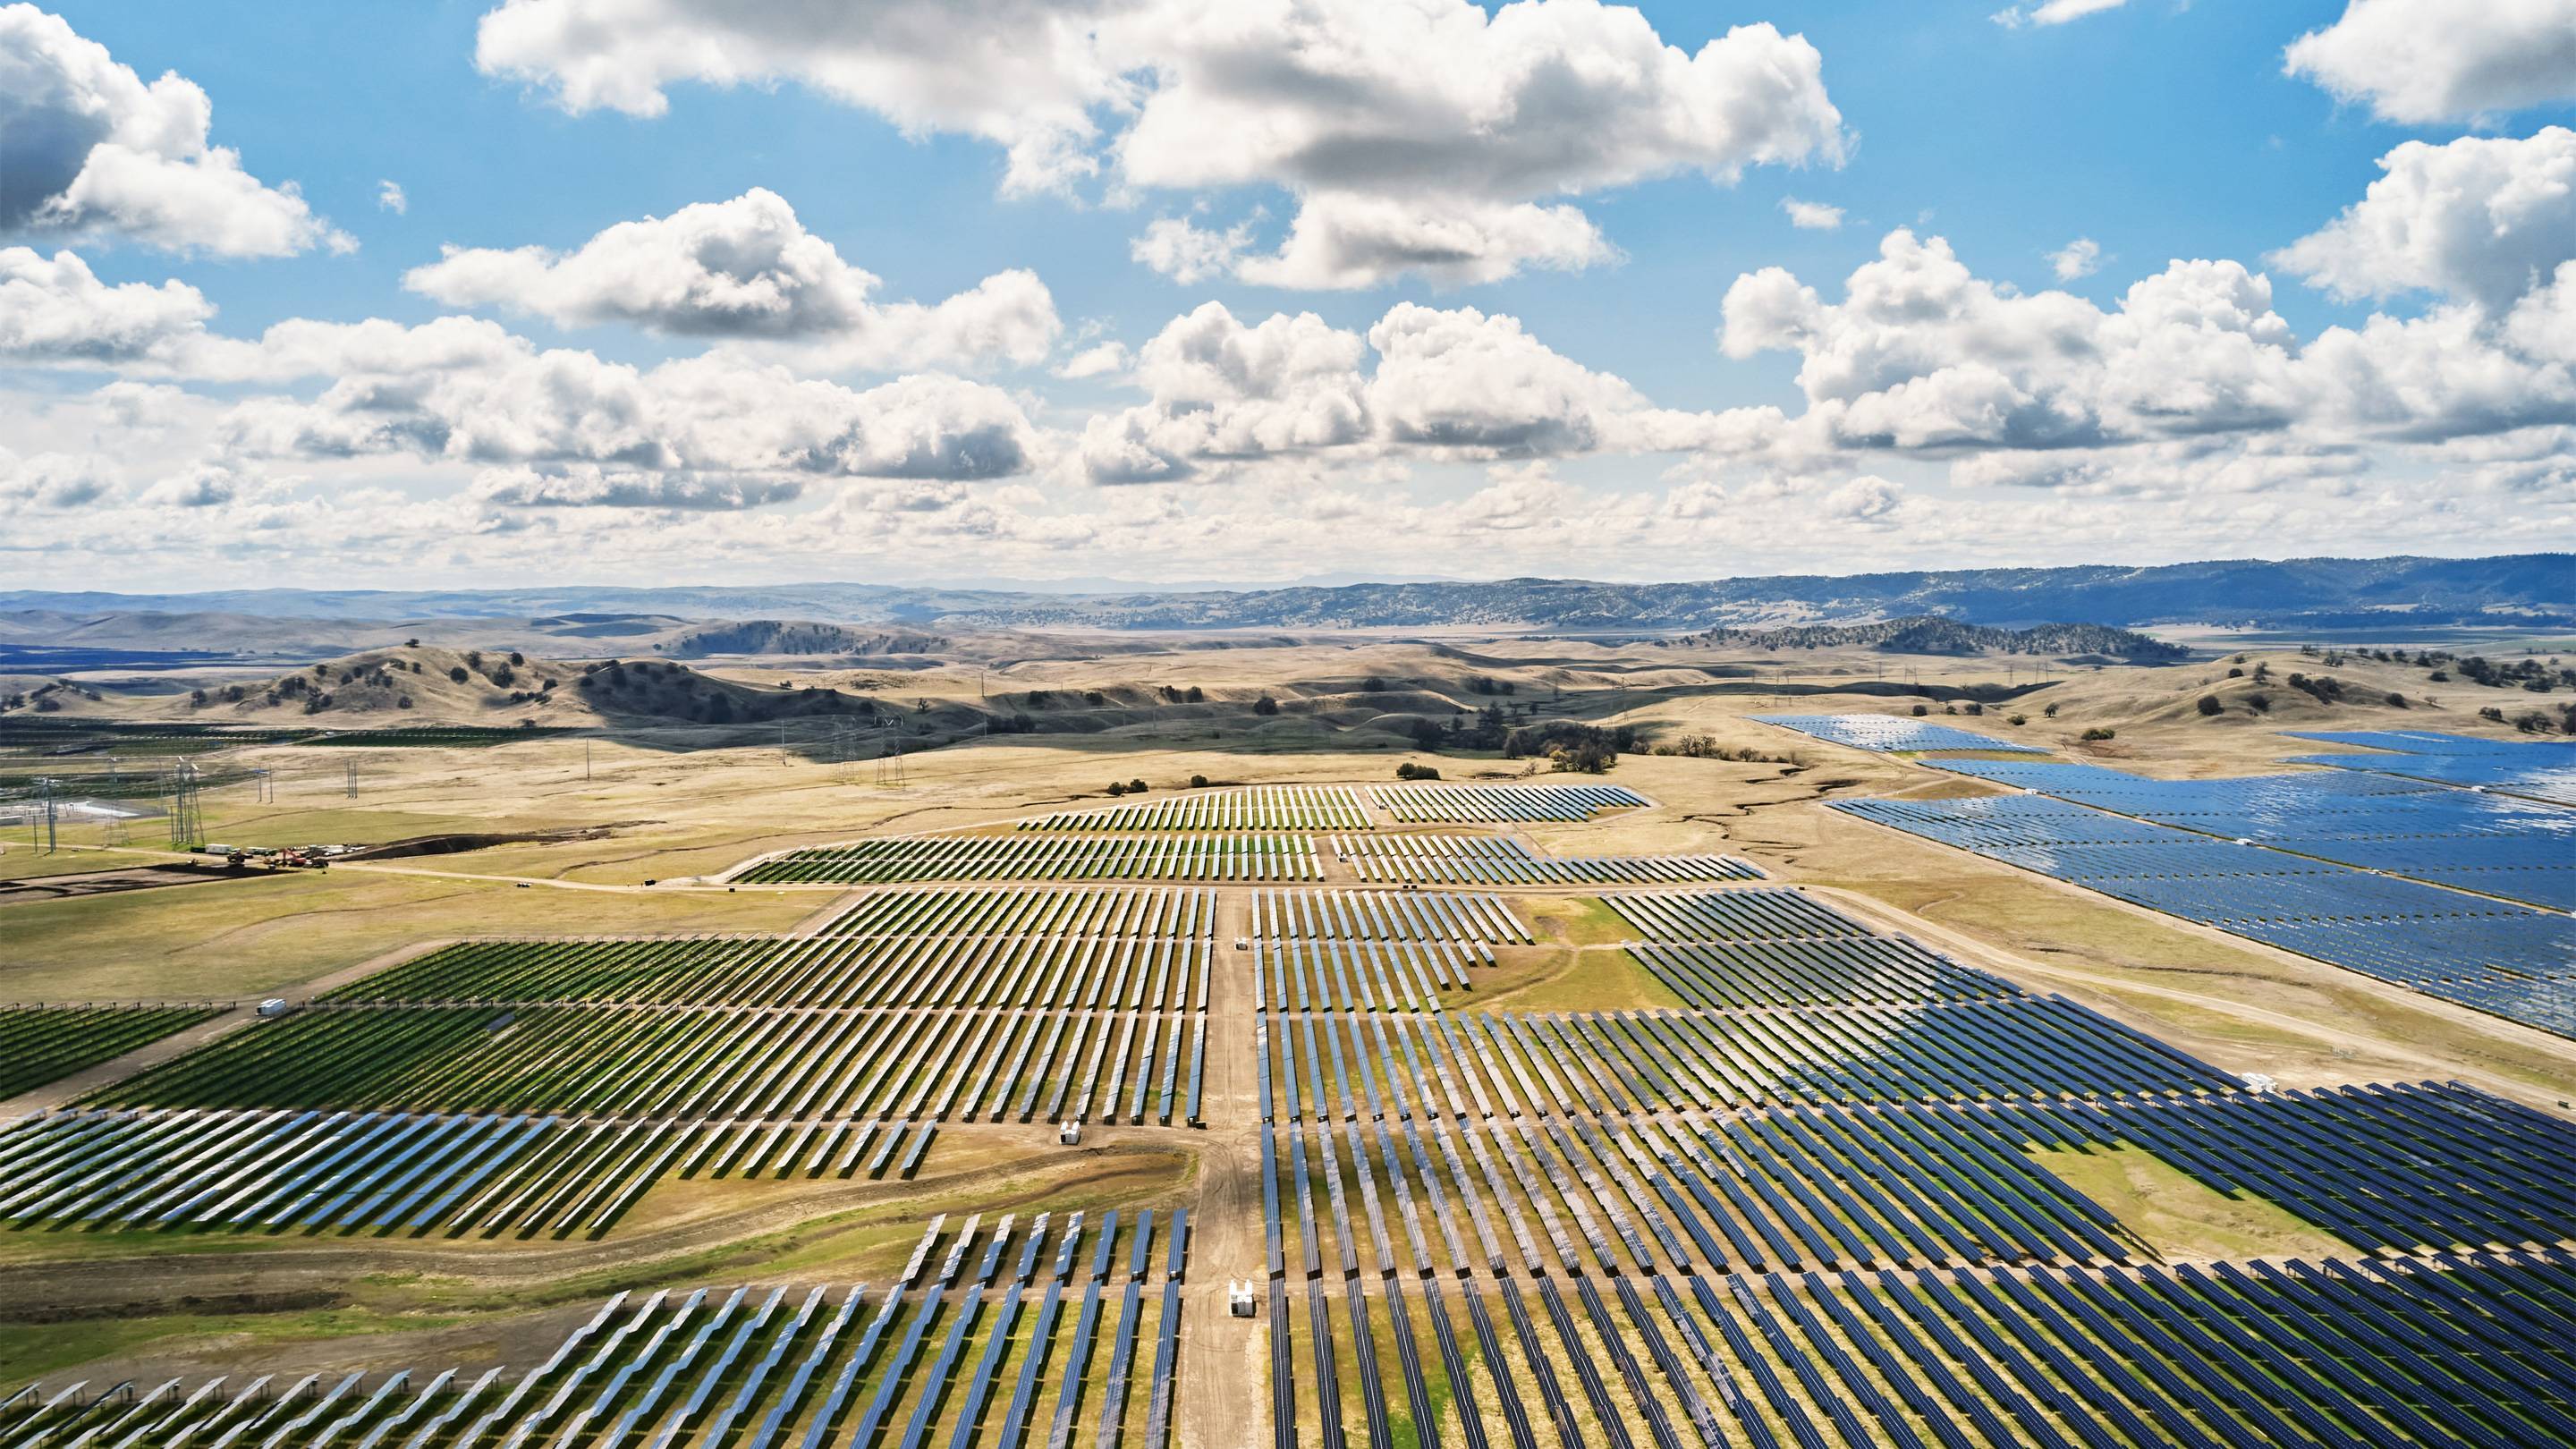 Apple announces new climate efforts with over 110 suppliers transitioning to renewable energy 033121 - Dopo Apple, anche Microsoft costruirà una “centrale elettrica”